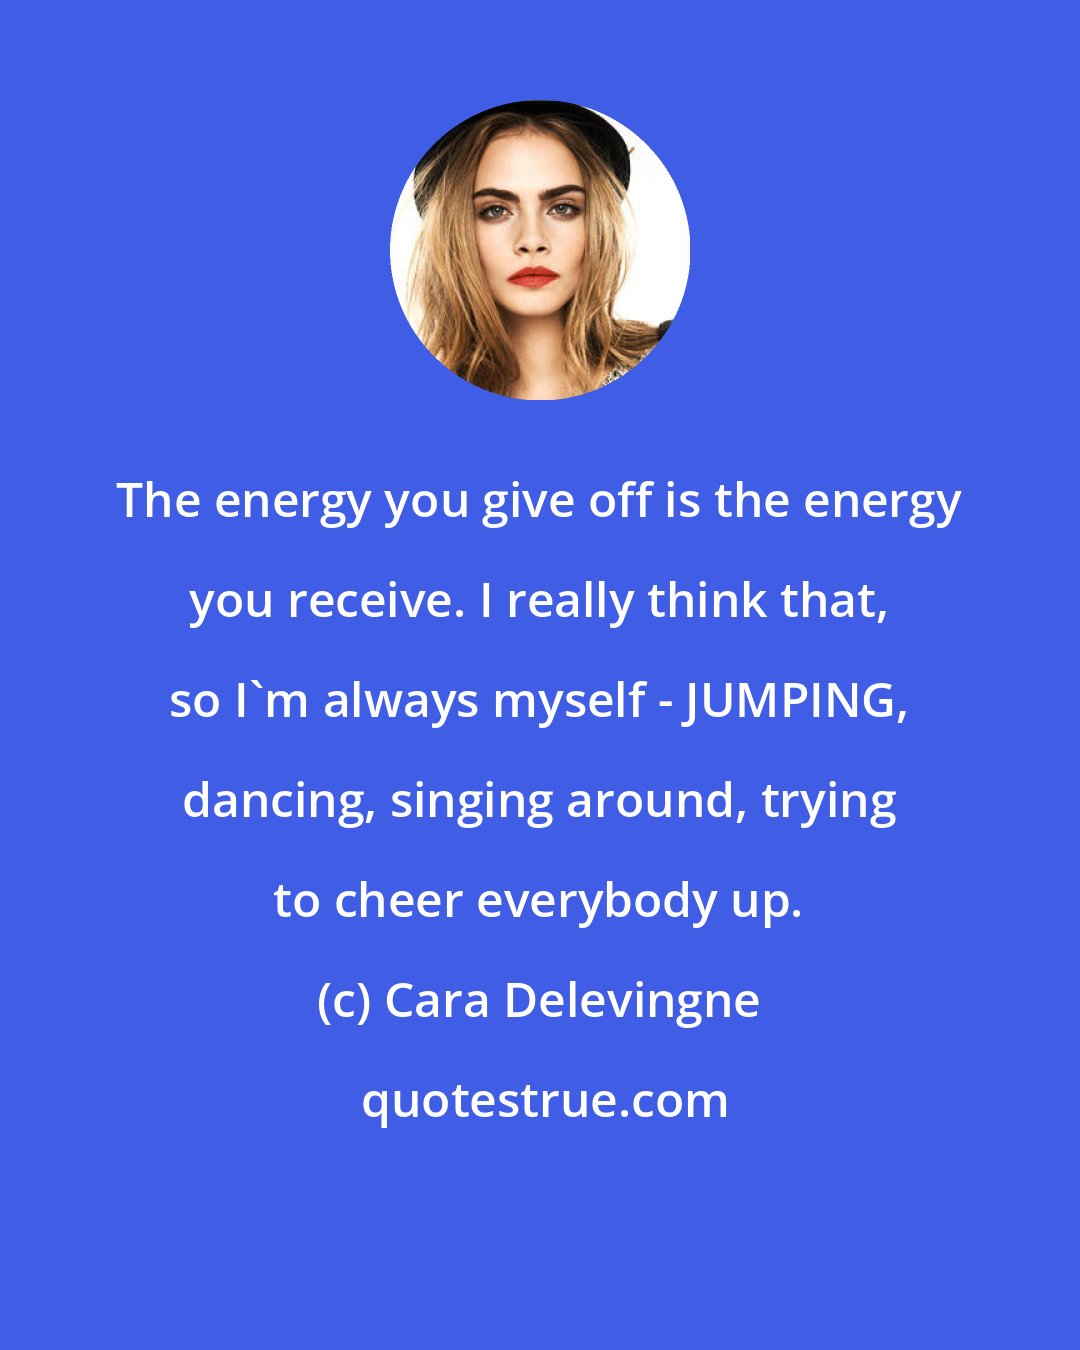 Cara Delevingne: The energy you give off is the energy you receive. I really think that, so I'm always myself - JUMPING, dancing, singing around, trying to cheer everybody up.